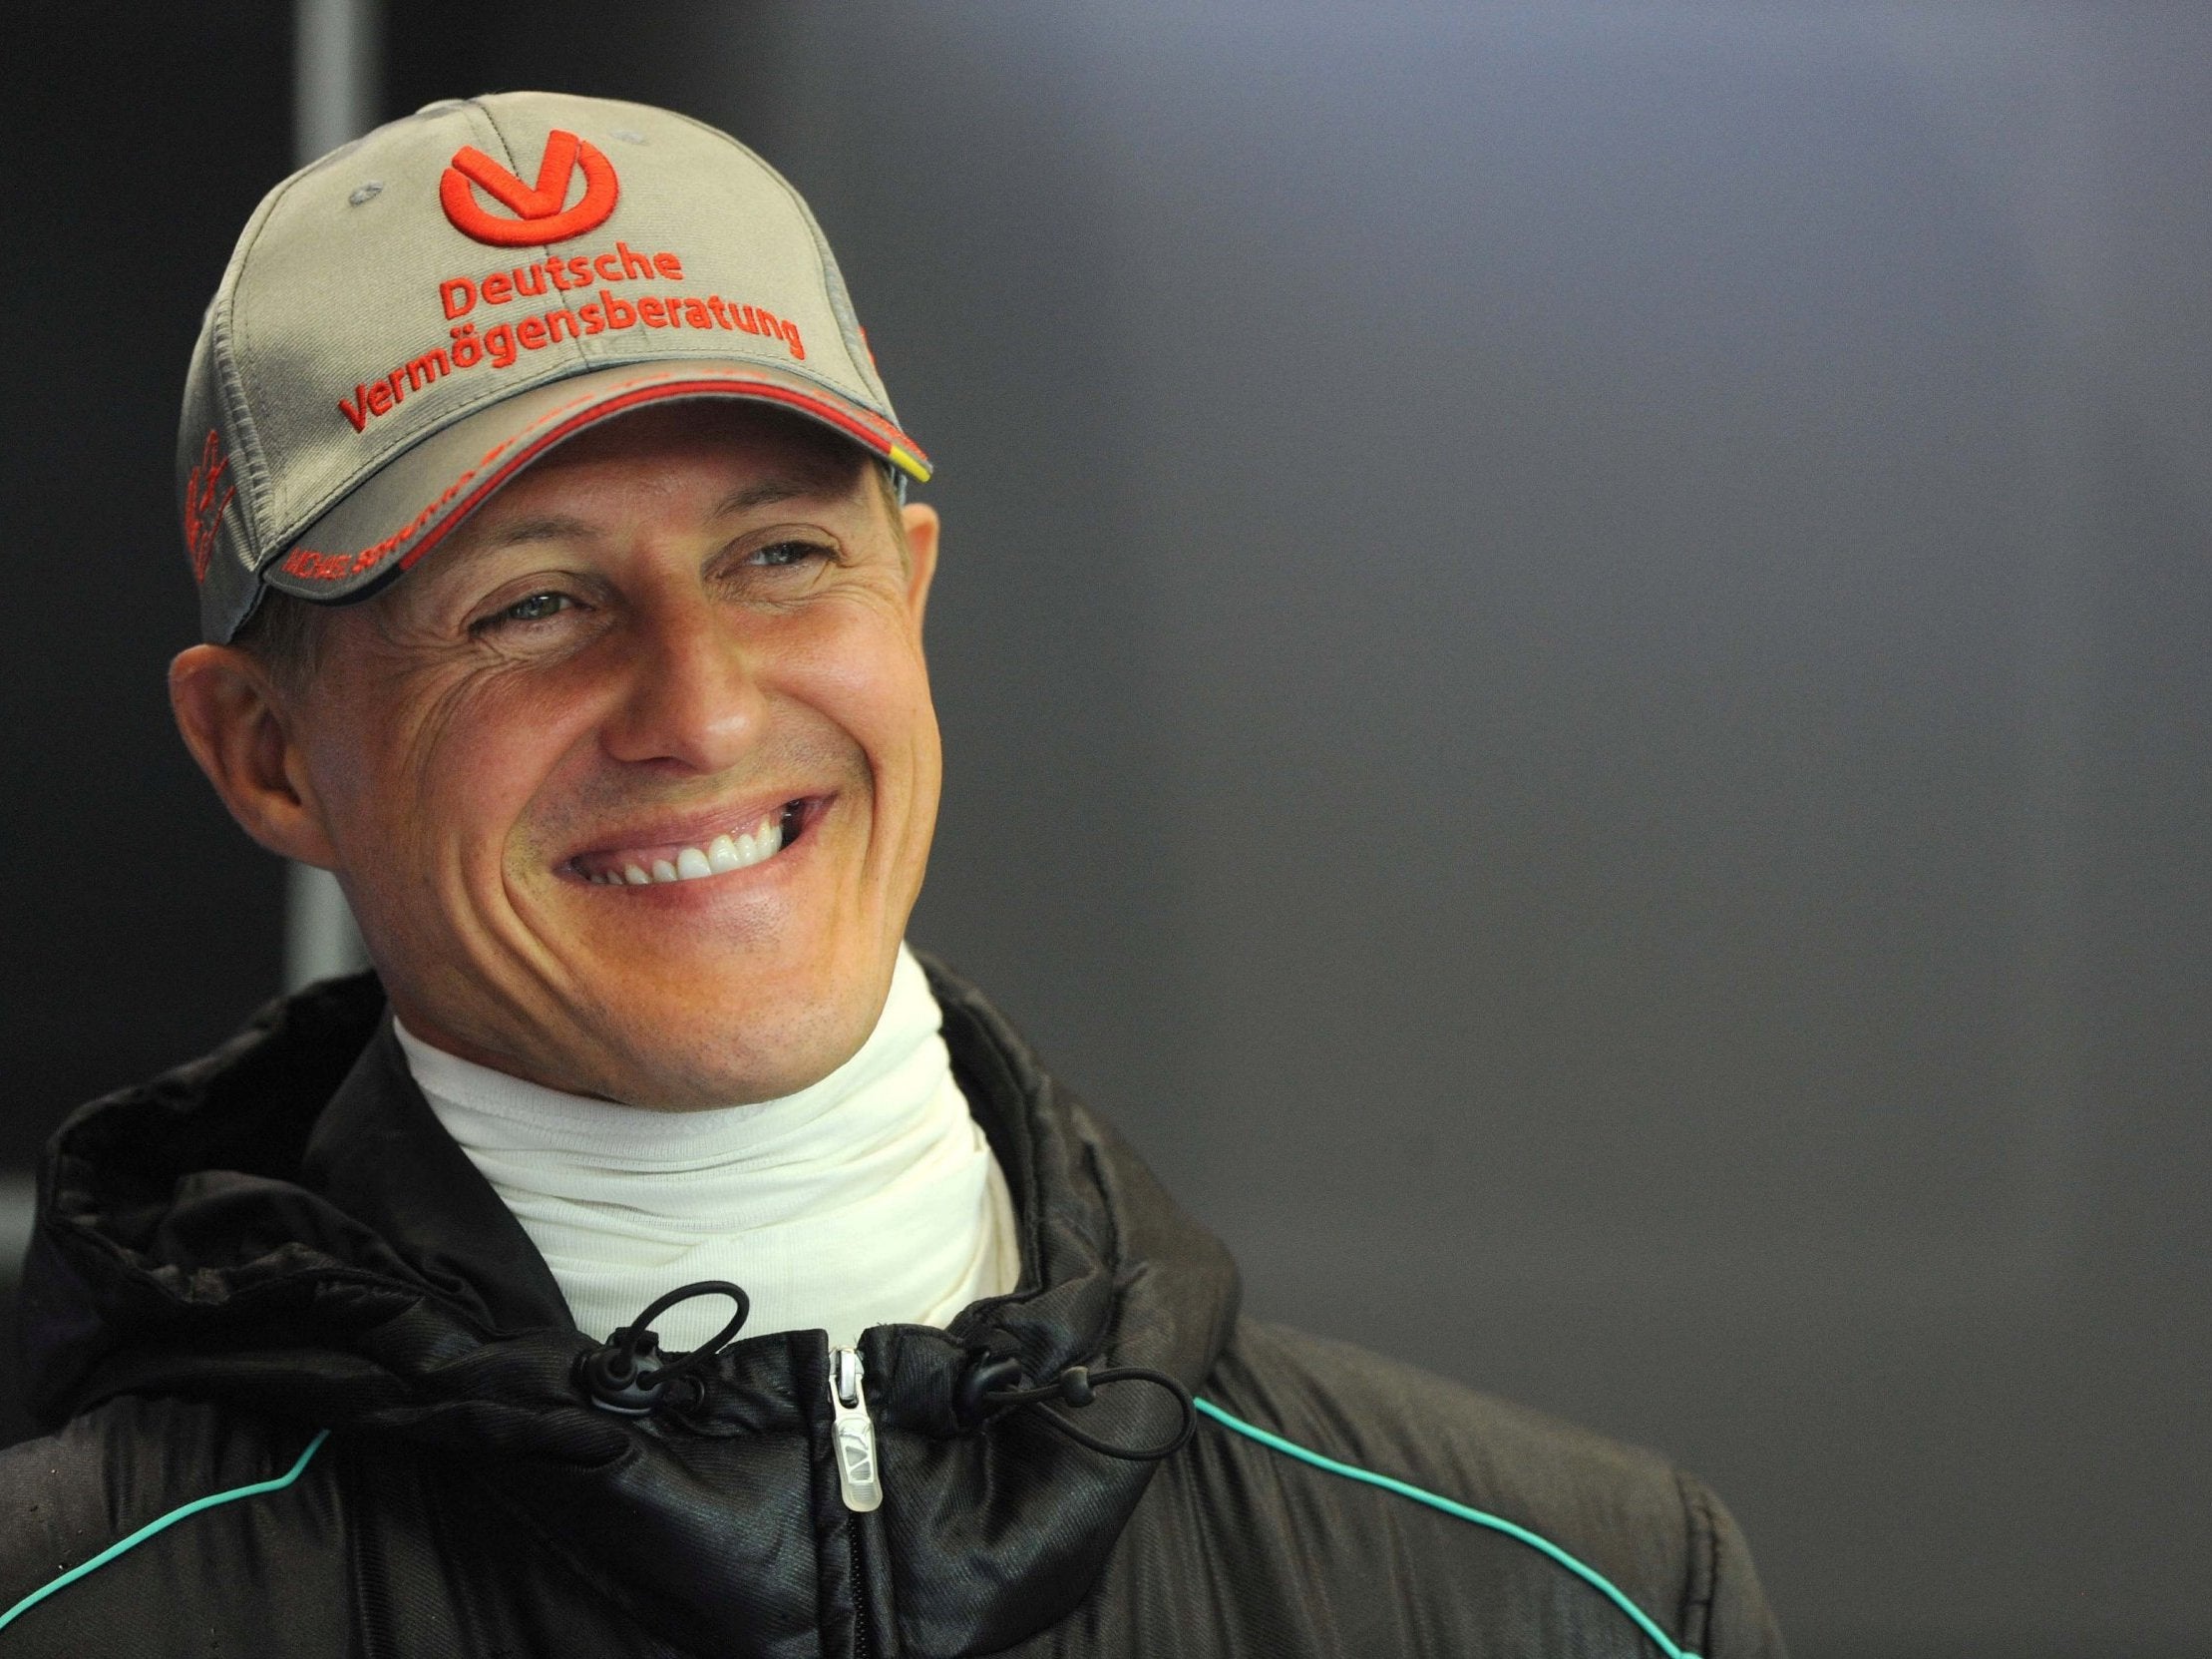 Schumacher is said to be in 'the very best of hands'